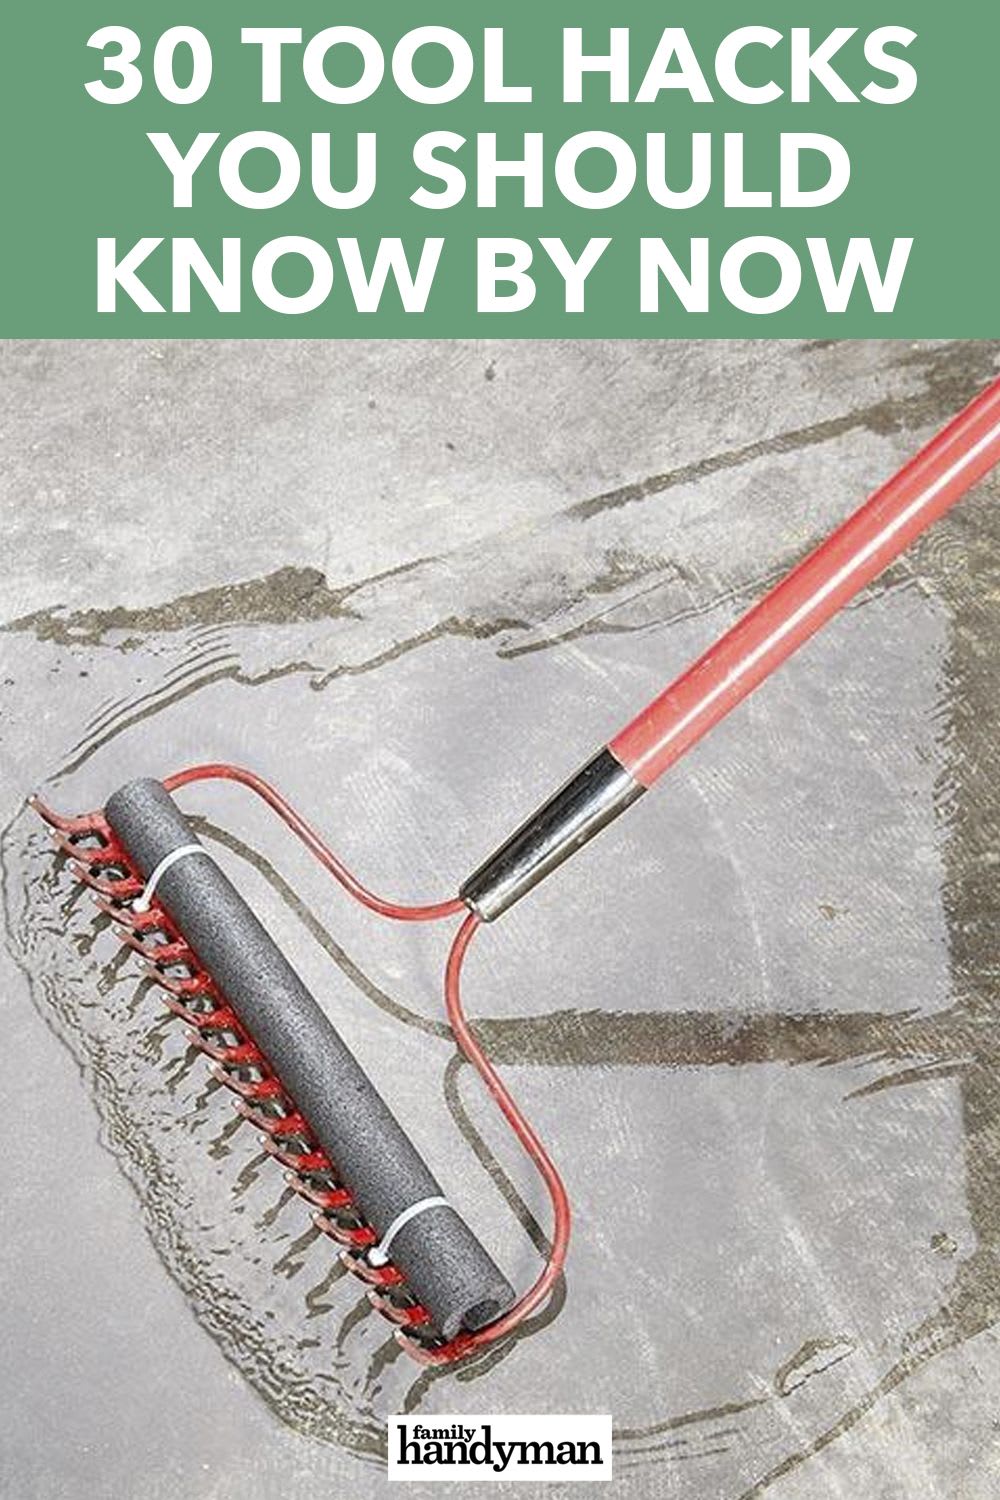 30 Tool Hacks You Should Know By Now